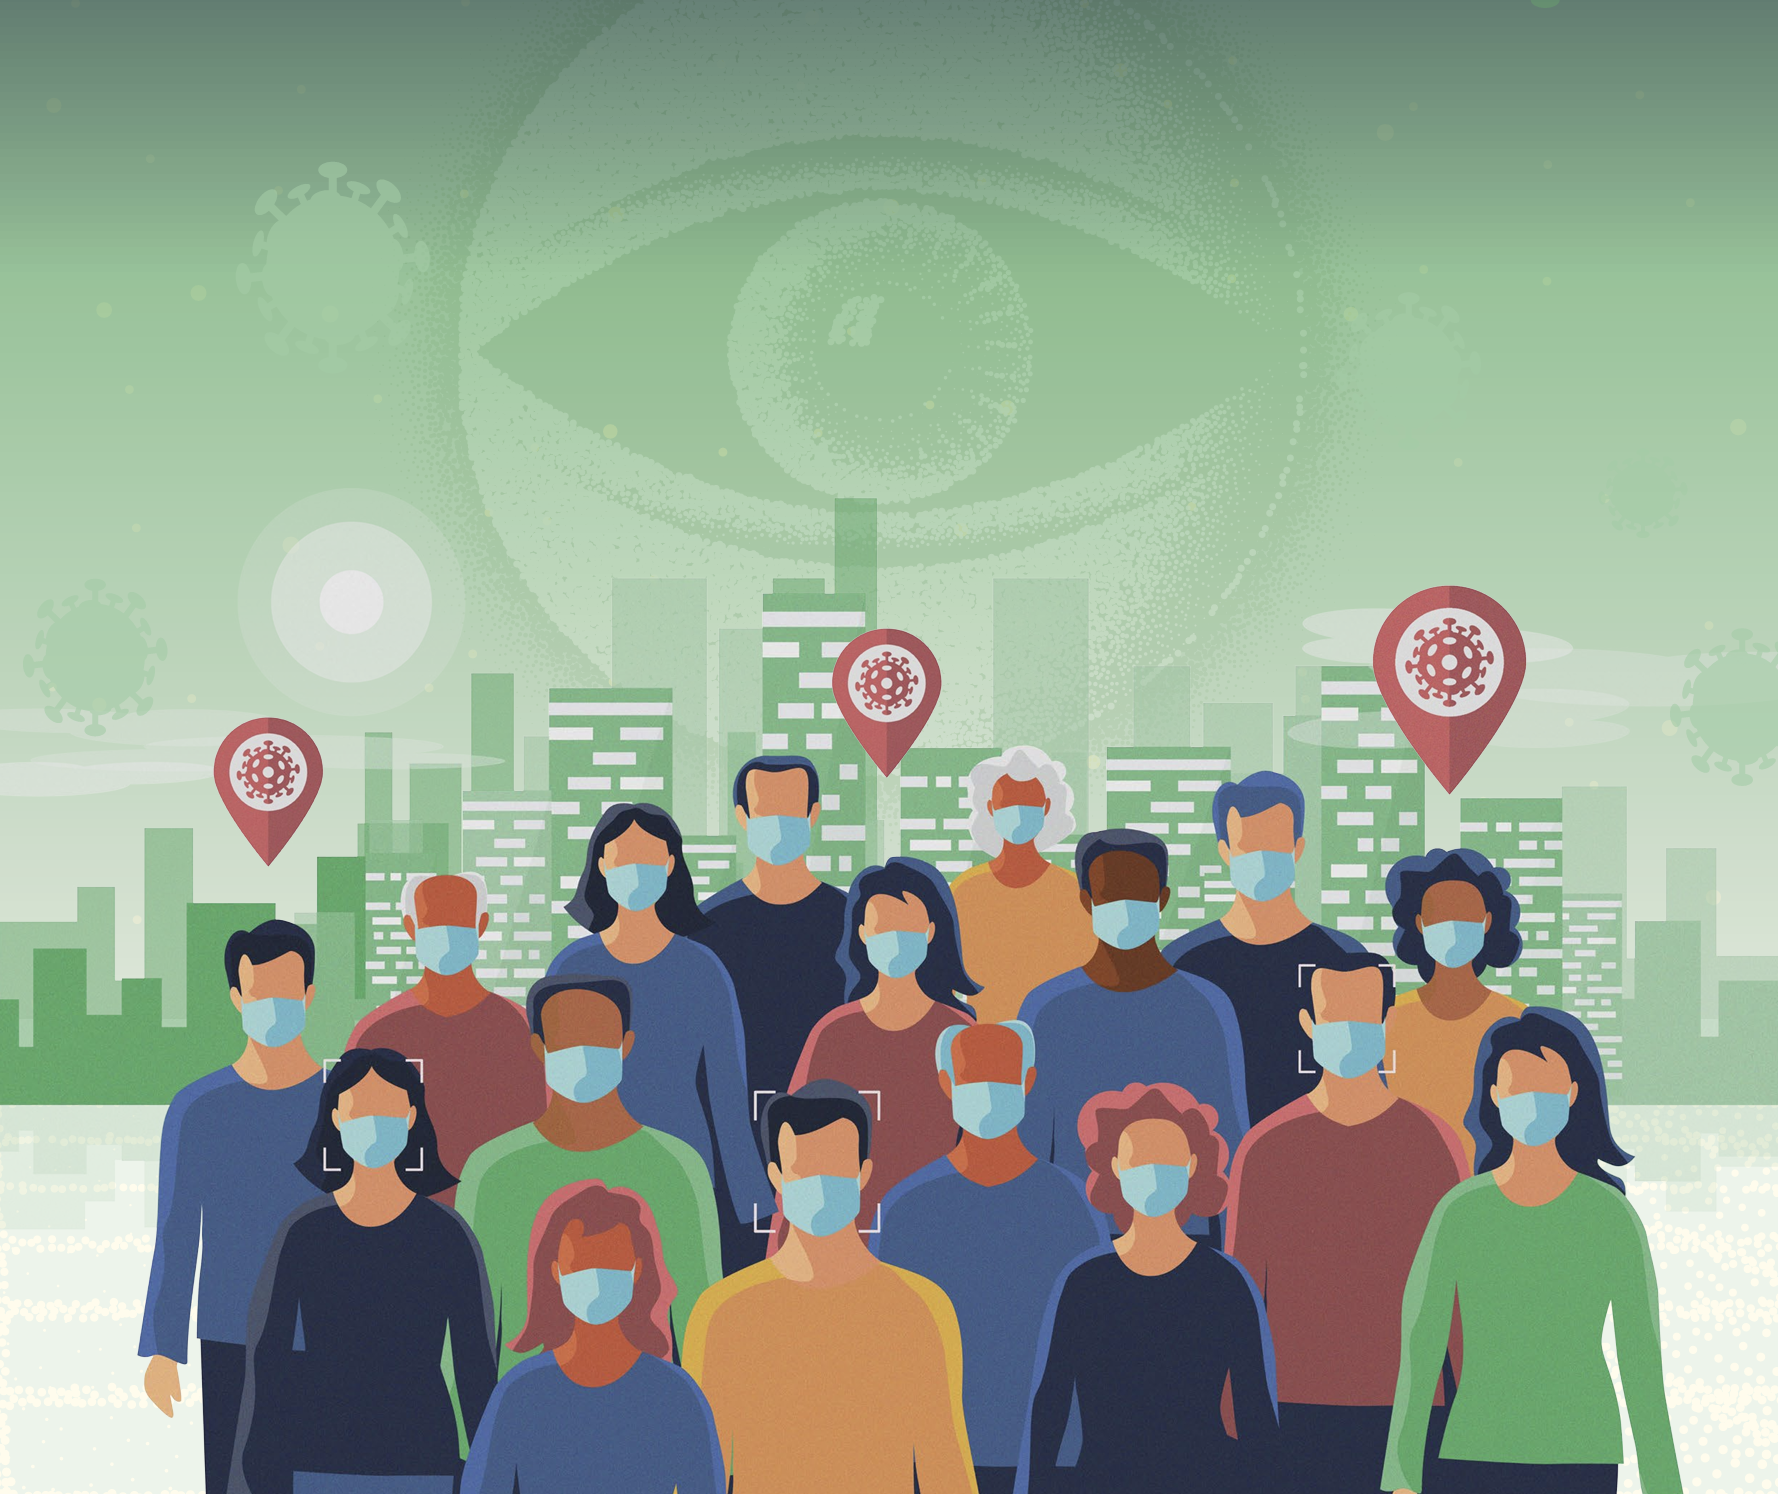 New joint study on state surveillance measures adopted during the Covid-19 pandemic